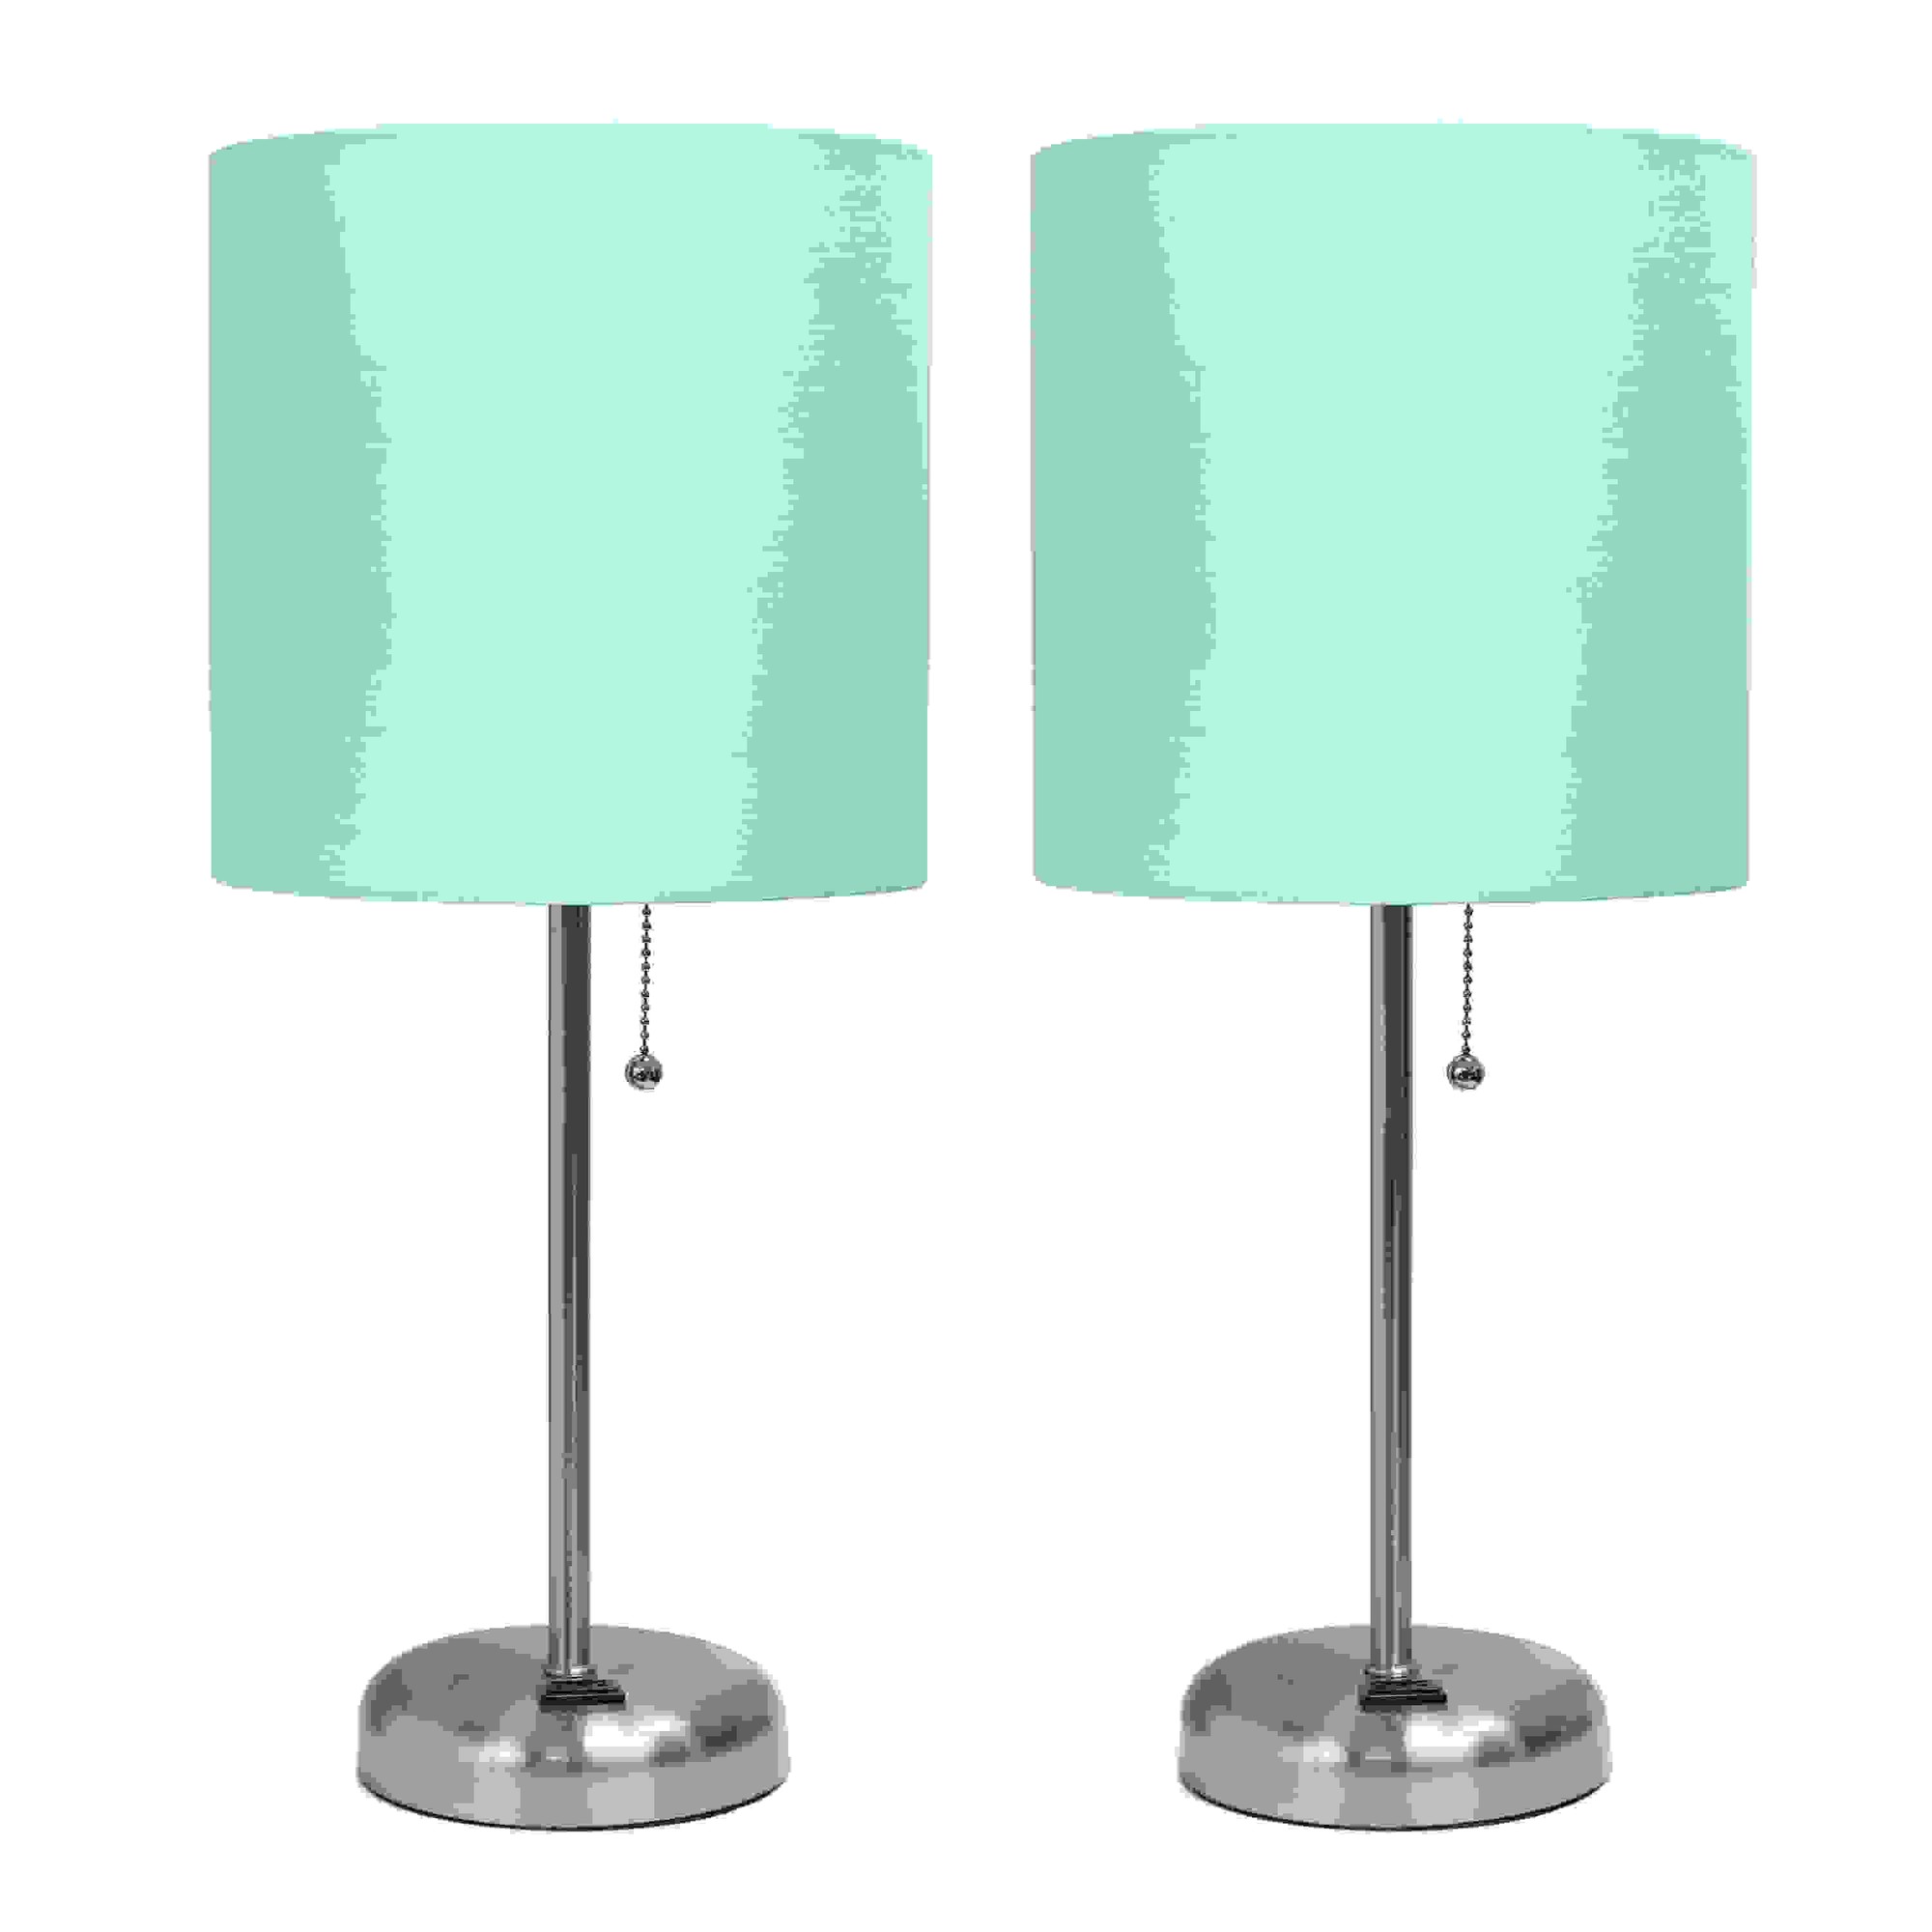 Simple Designs Brushed Steel Stick Lamp with Charging Outlet and Fabric Shade 2 Pack Set, Aqua